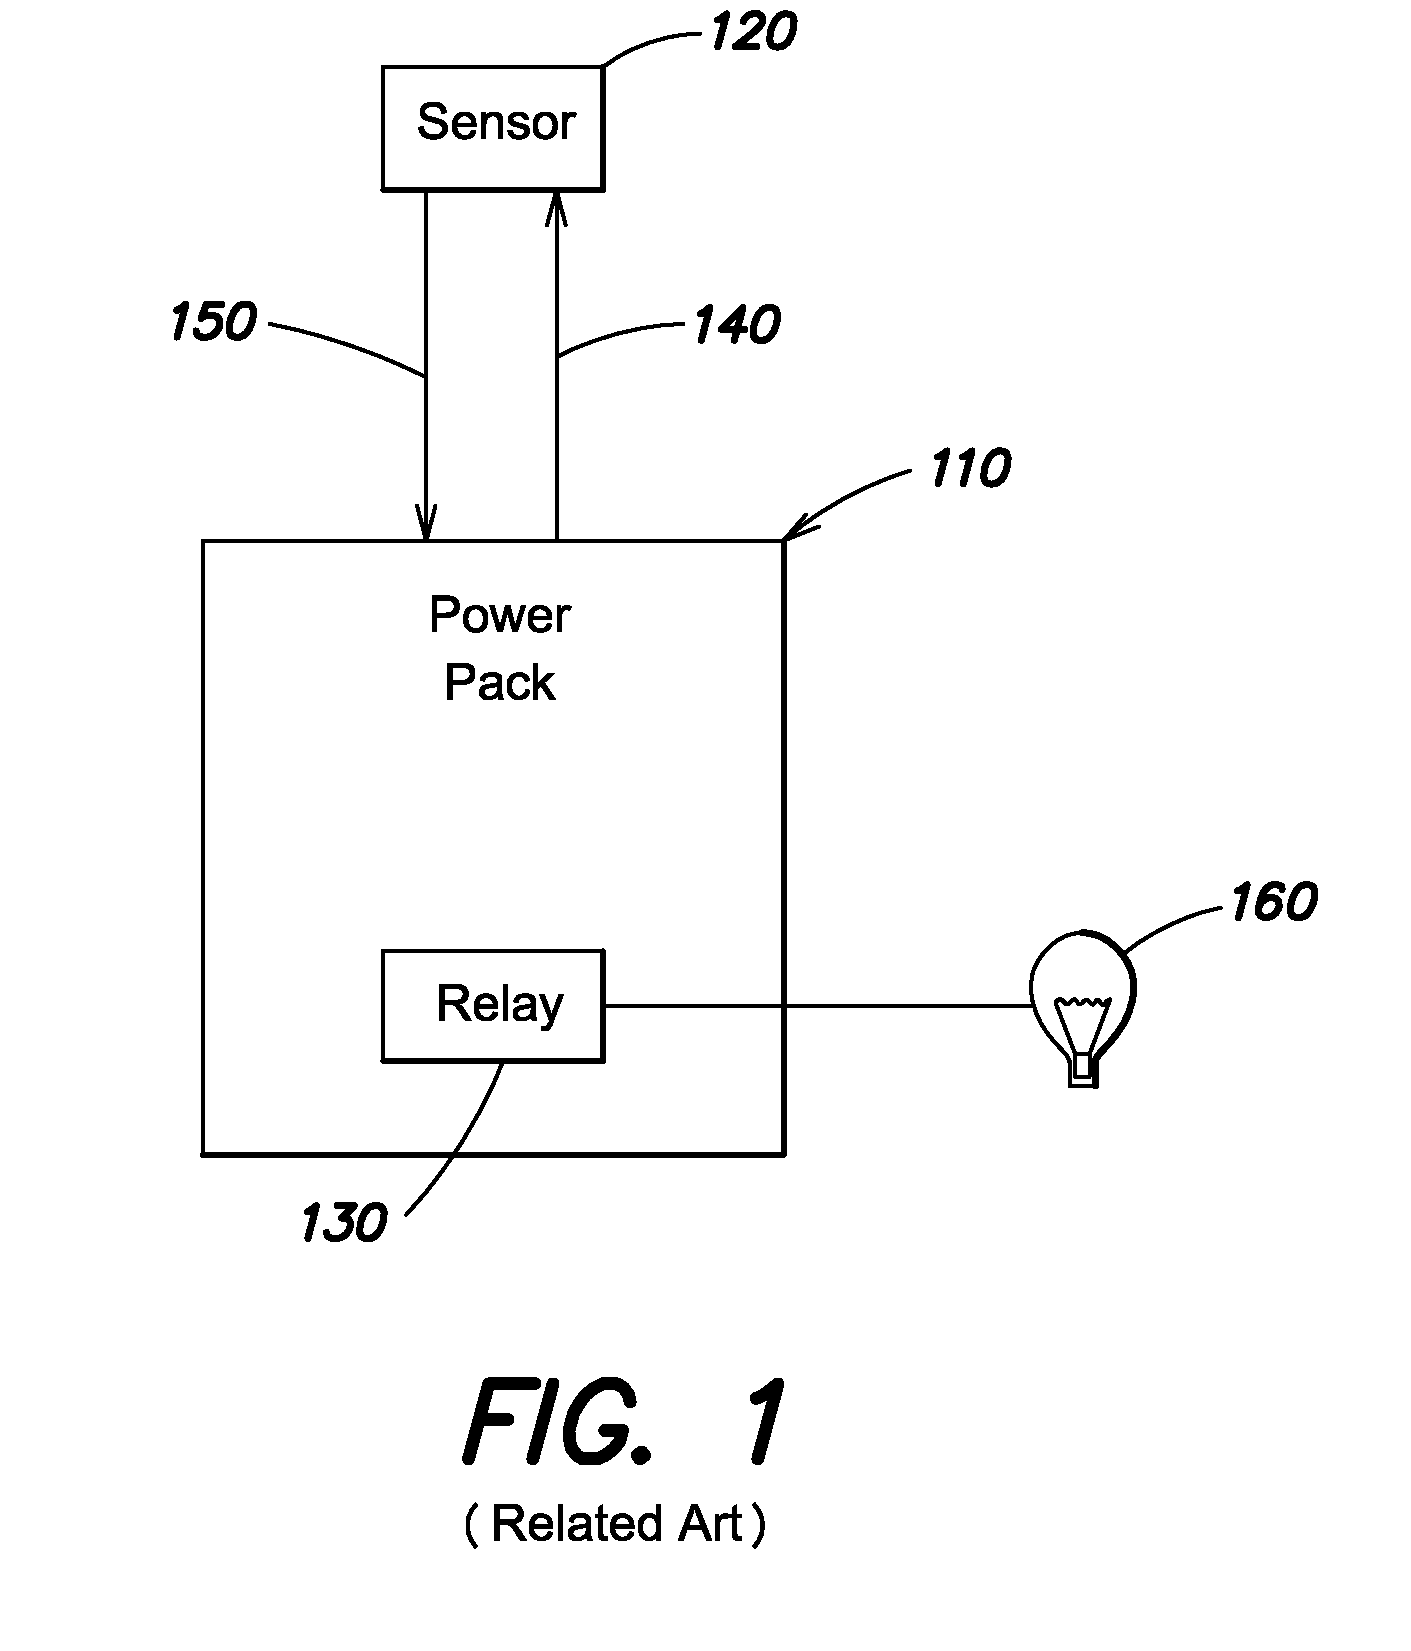 Occupancy sensor with embedded signaling capability